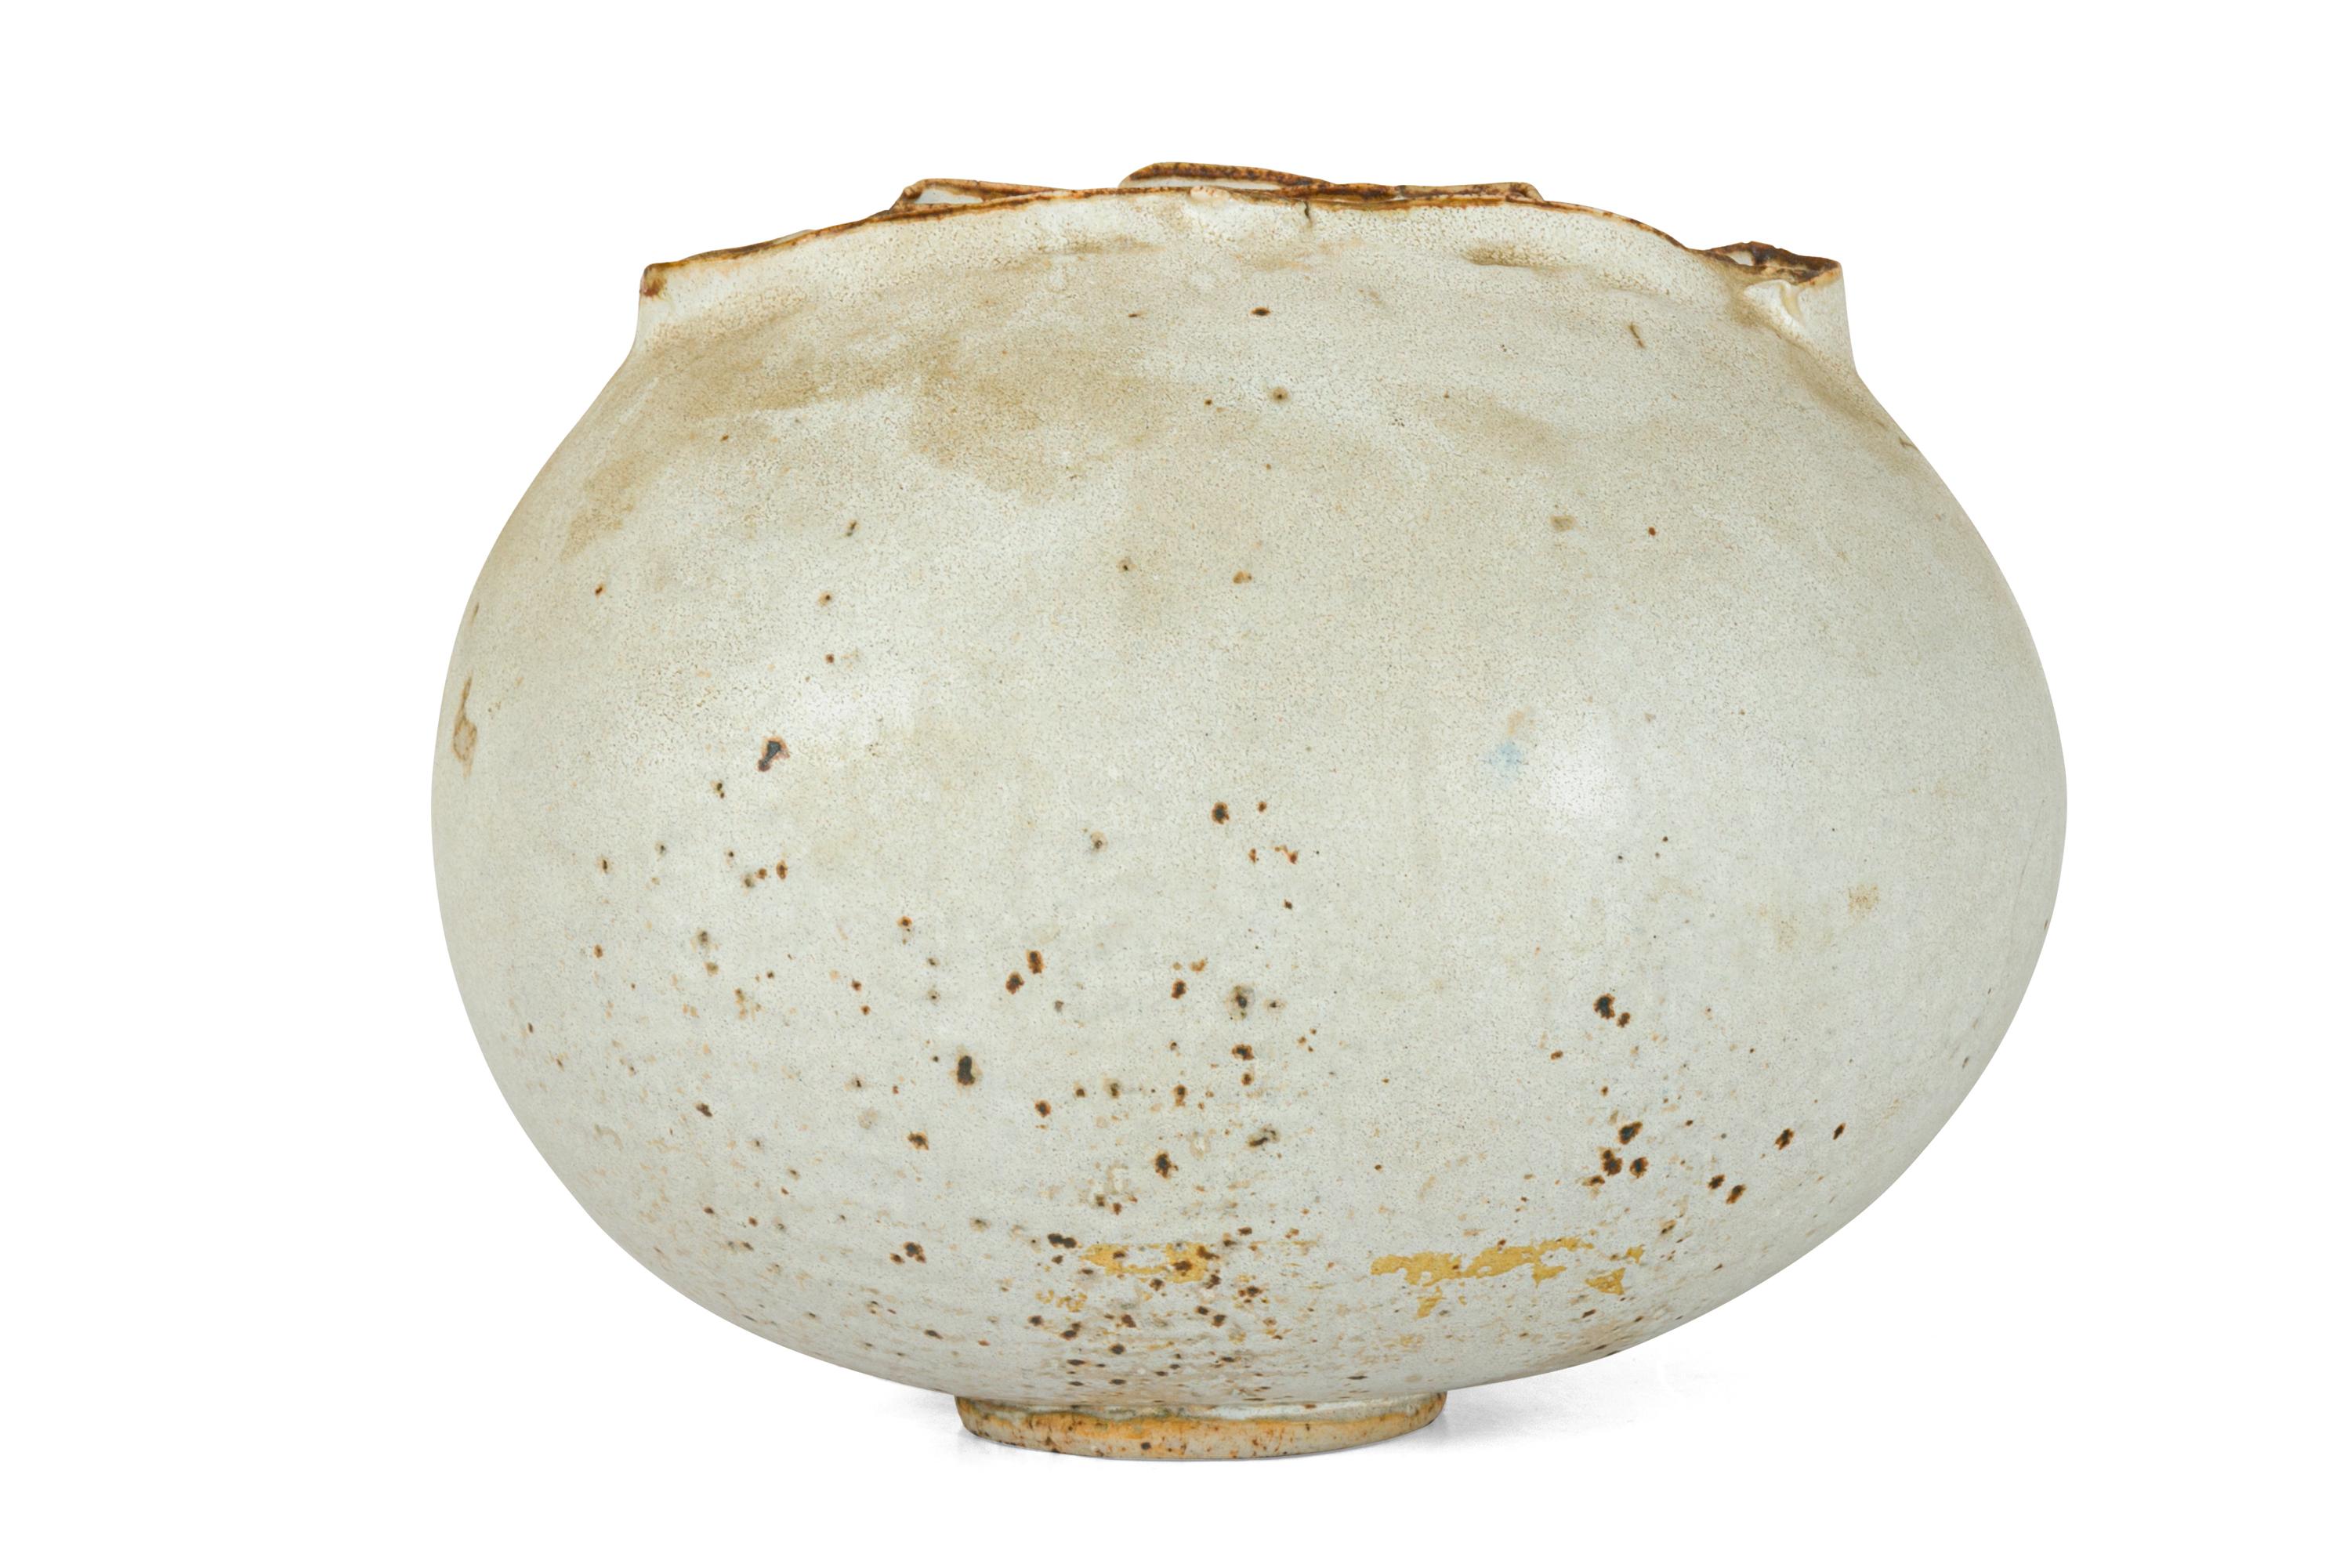 A fascinating example of studio pottery. The pod like form has a wonderfully heavy glaze creating an almost volcanic effect. There is a mark on the bottom that I couldn't make out but clearly a talented potter.